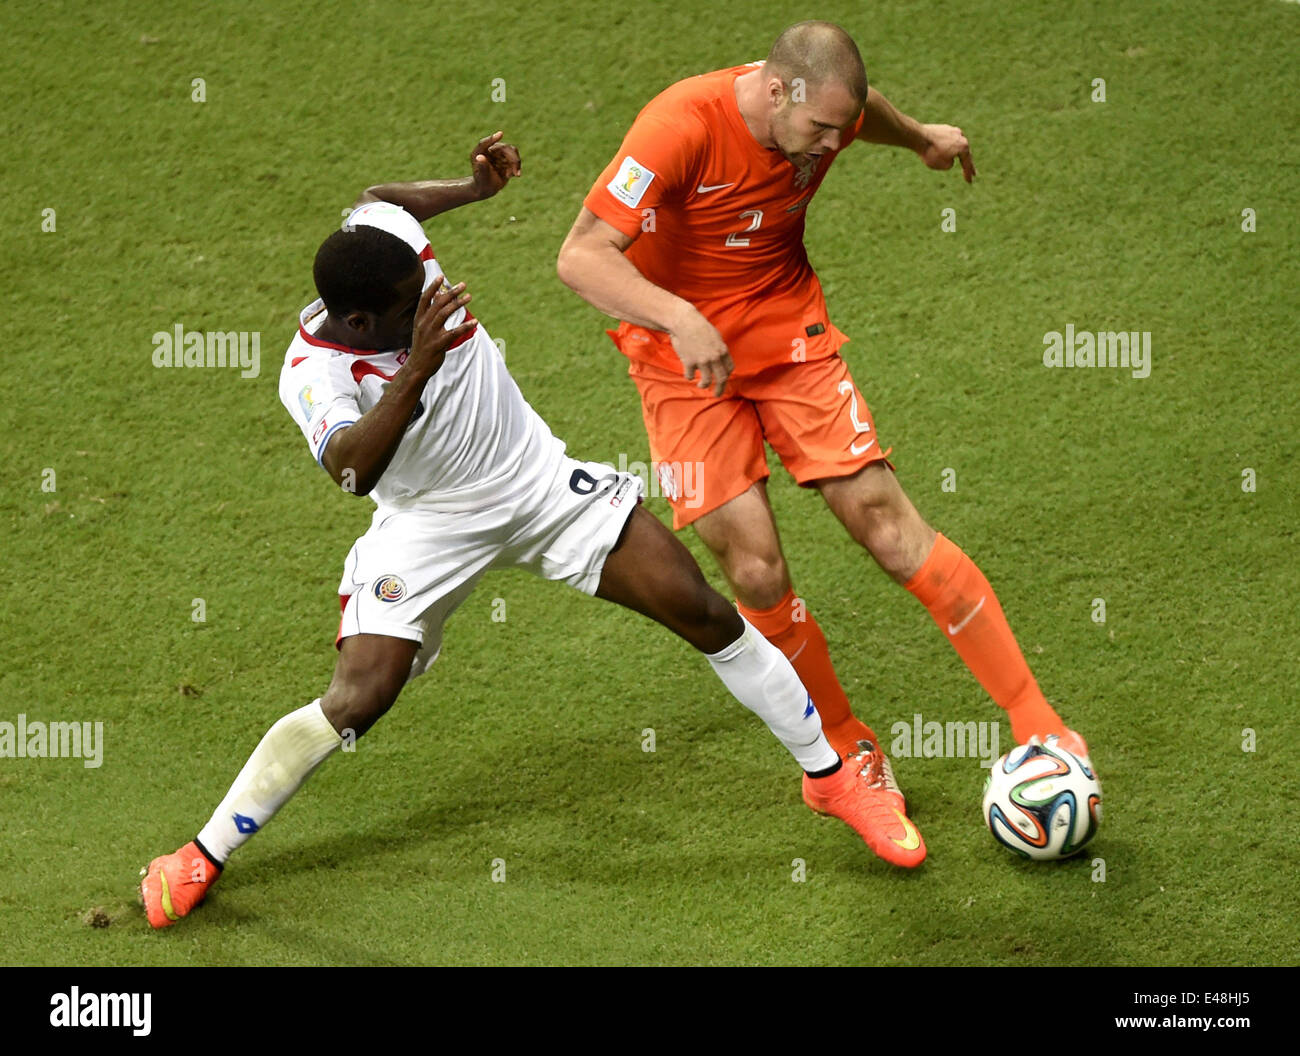 Salvador, Brazil. 5th July, 2014. Netherlands' Ron Vlaar (R) vies with Costa Rica's Joel Campbell during a quarter-finals match between Netherlands and Costa Rica of 2014 FIFA World Cup at the Arena Fonte Nova Stadium in Salvador, Brazil, on July 5, 2014. Credit:  Yang Lei/Xinhua/Alamy Live News Stock Photo